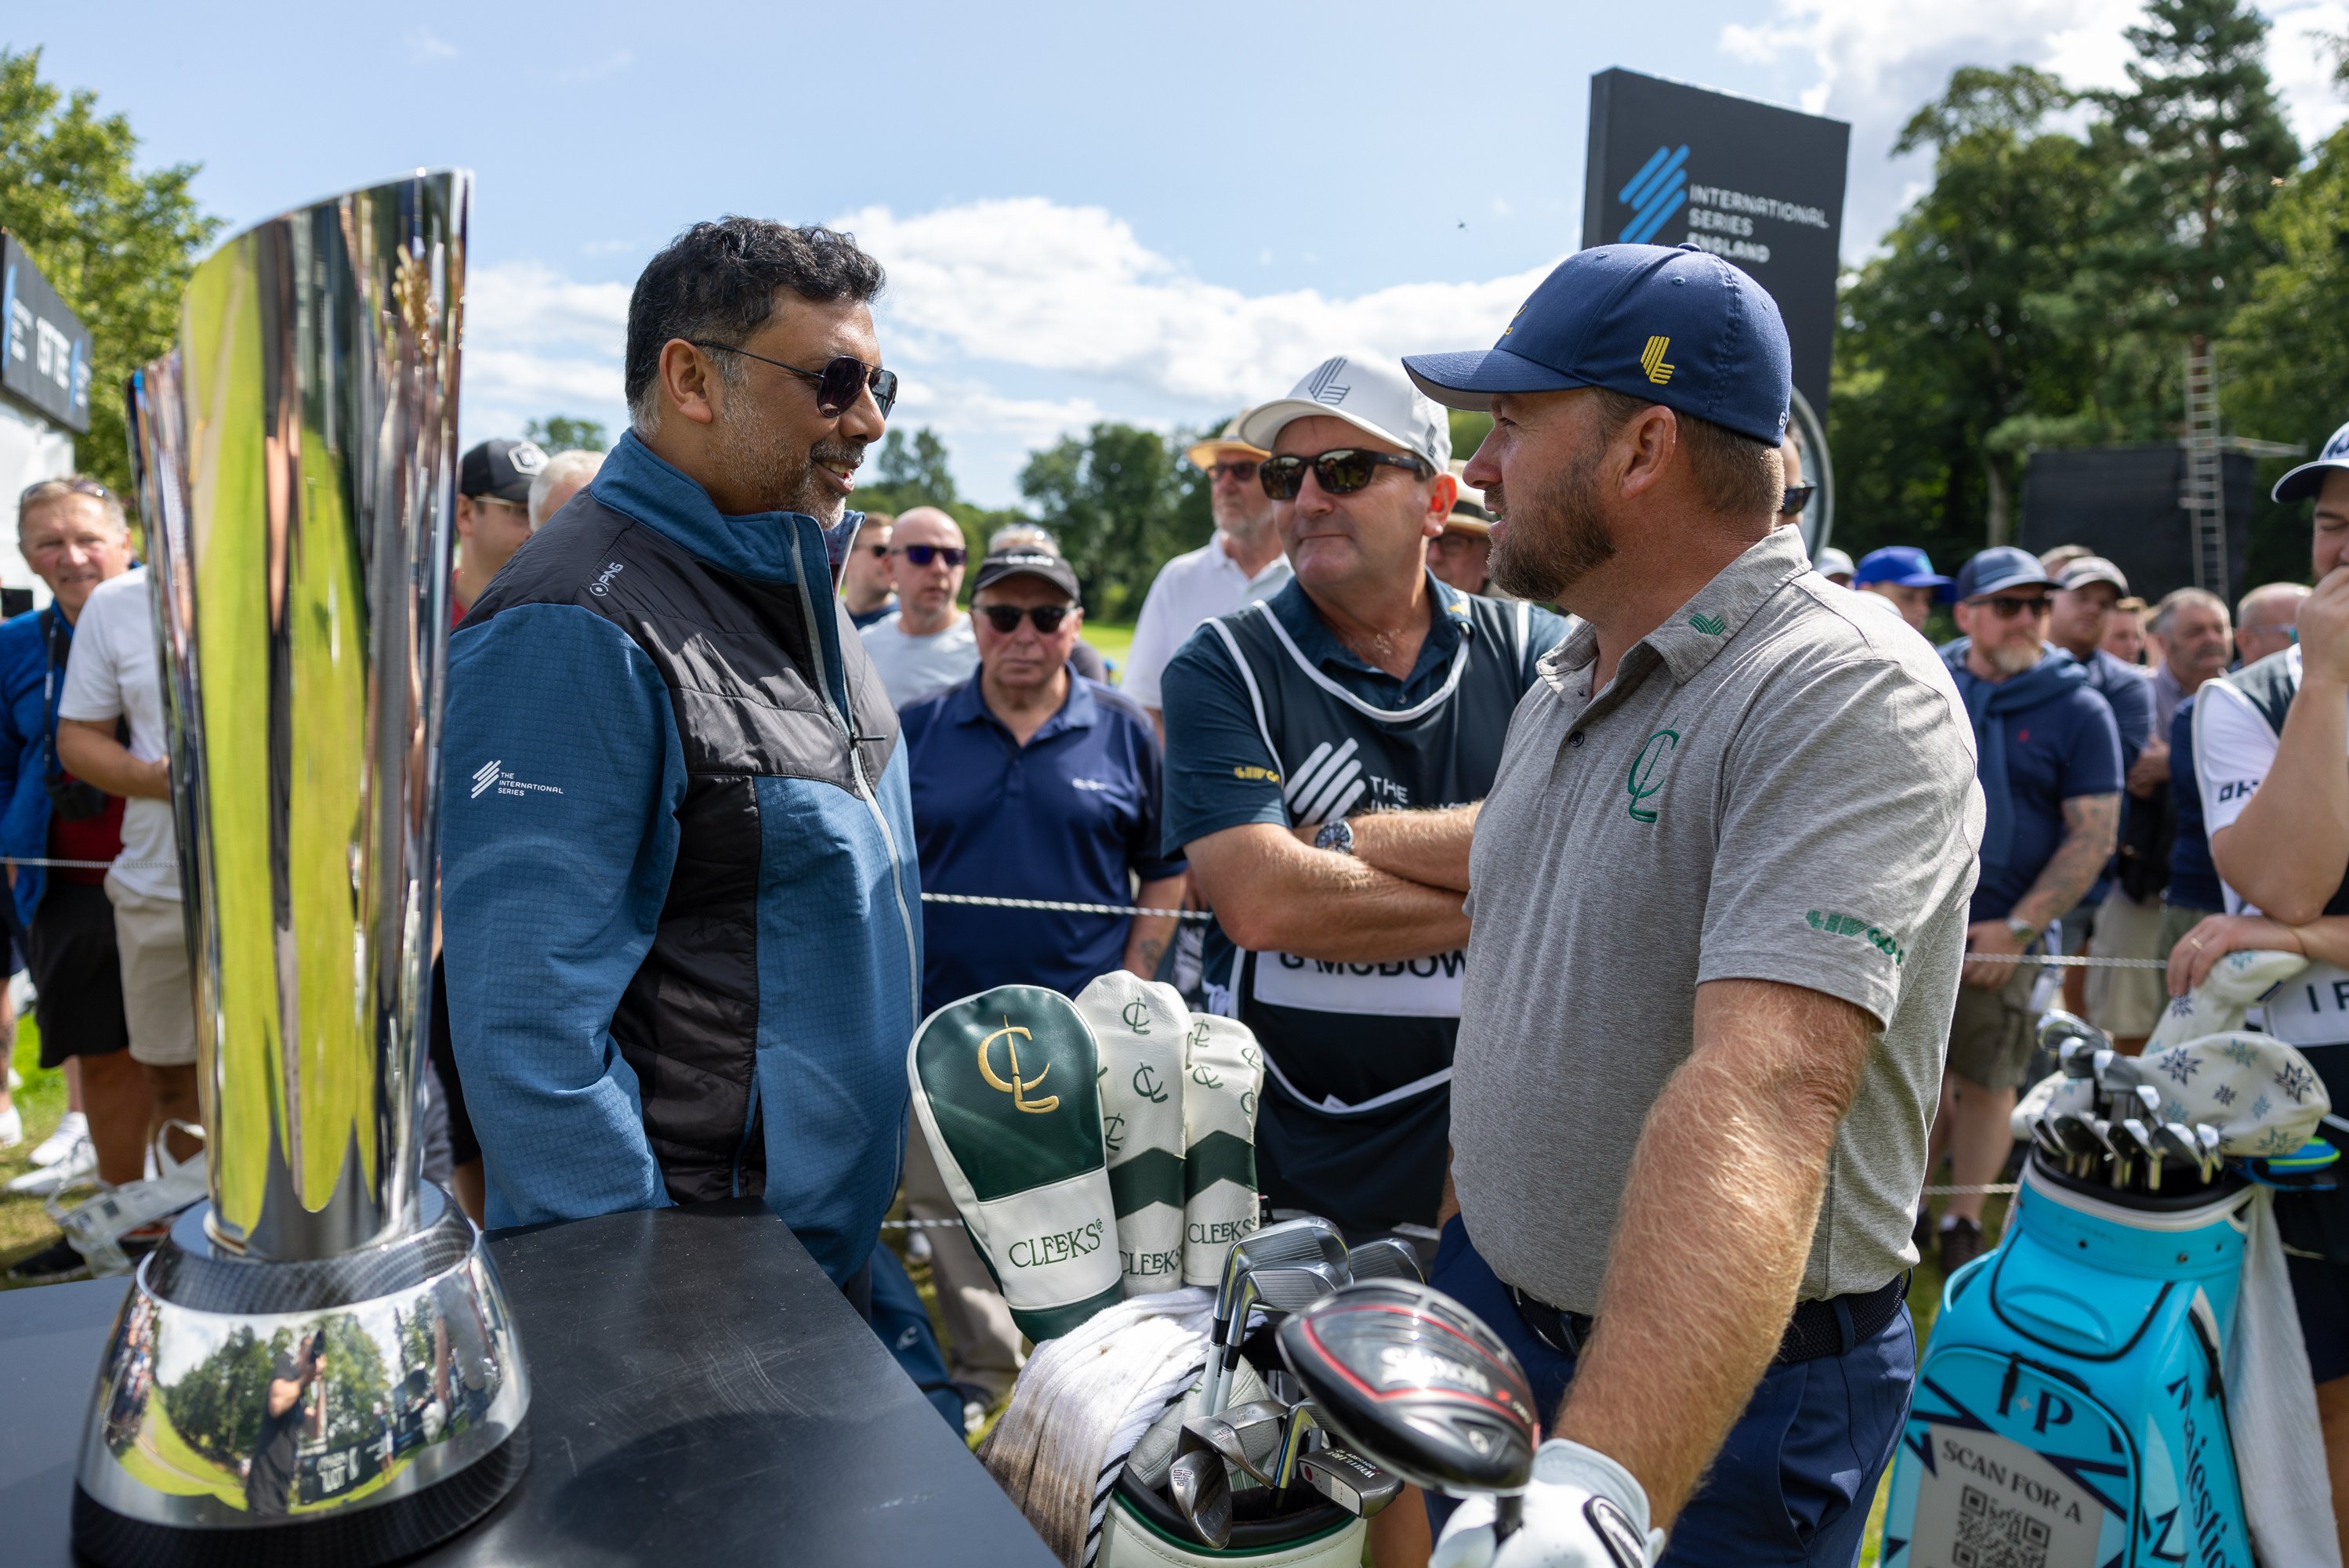 Rahul Singh, head of the International Series (left) and Graeme McDowell have a chat during an event in England. Photo: Asian Tour